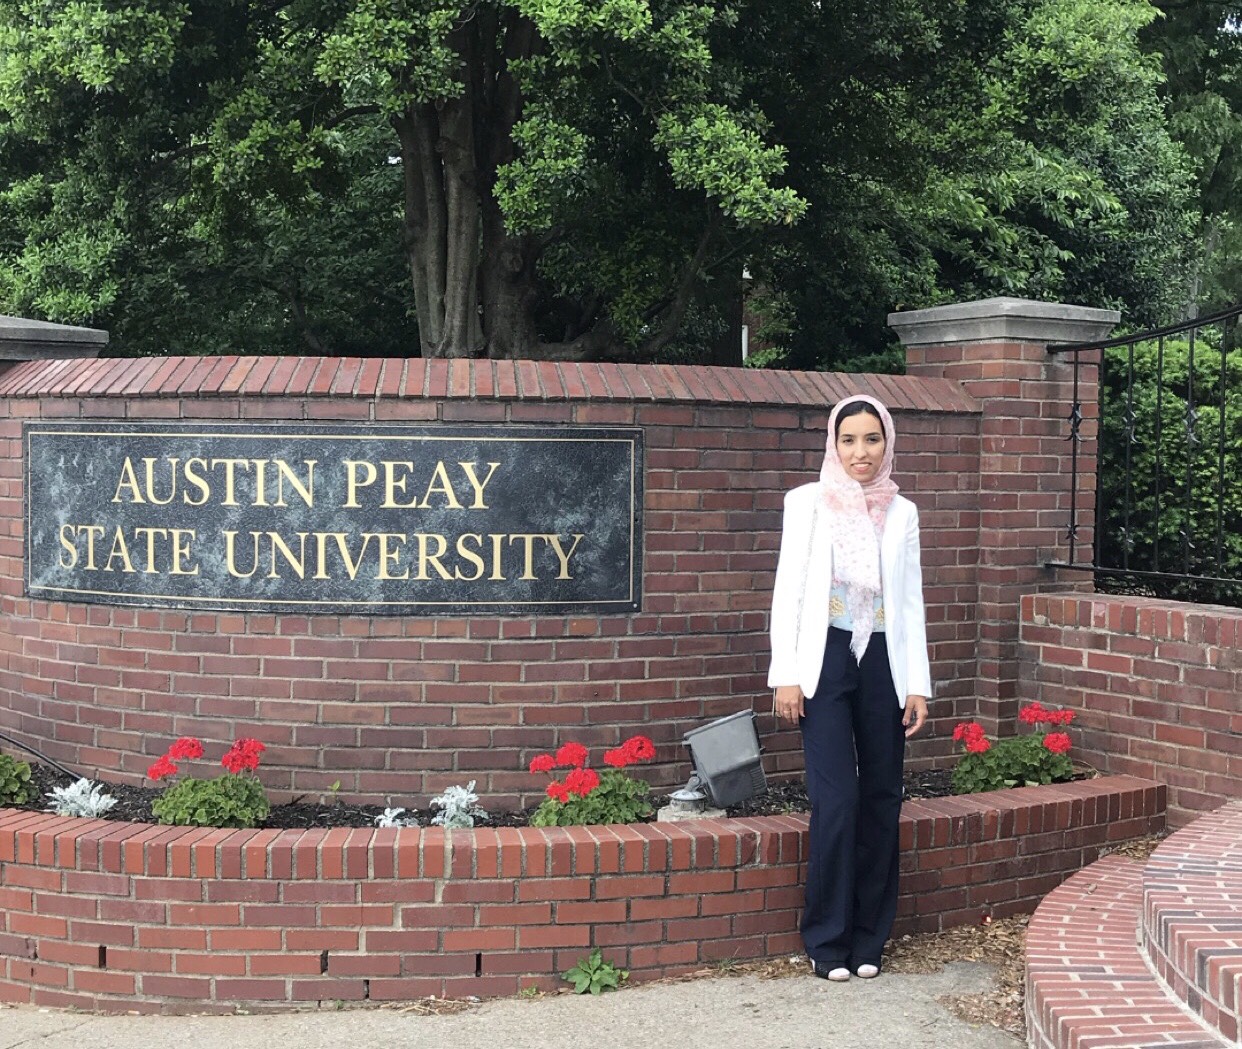 Hanan Alghamdi’s immediate plans after gaining a teaching master's from APSU are to return to Saudi Arabia, hoping to apply what she’s learned to elementary education “to fill the gaps in education” there.